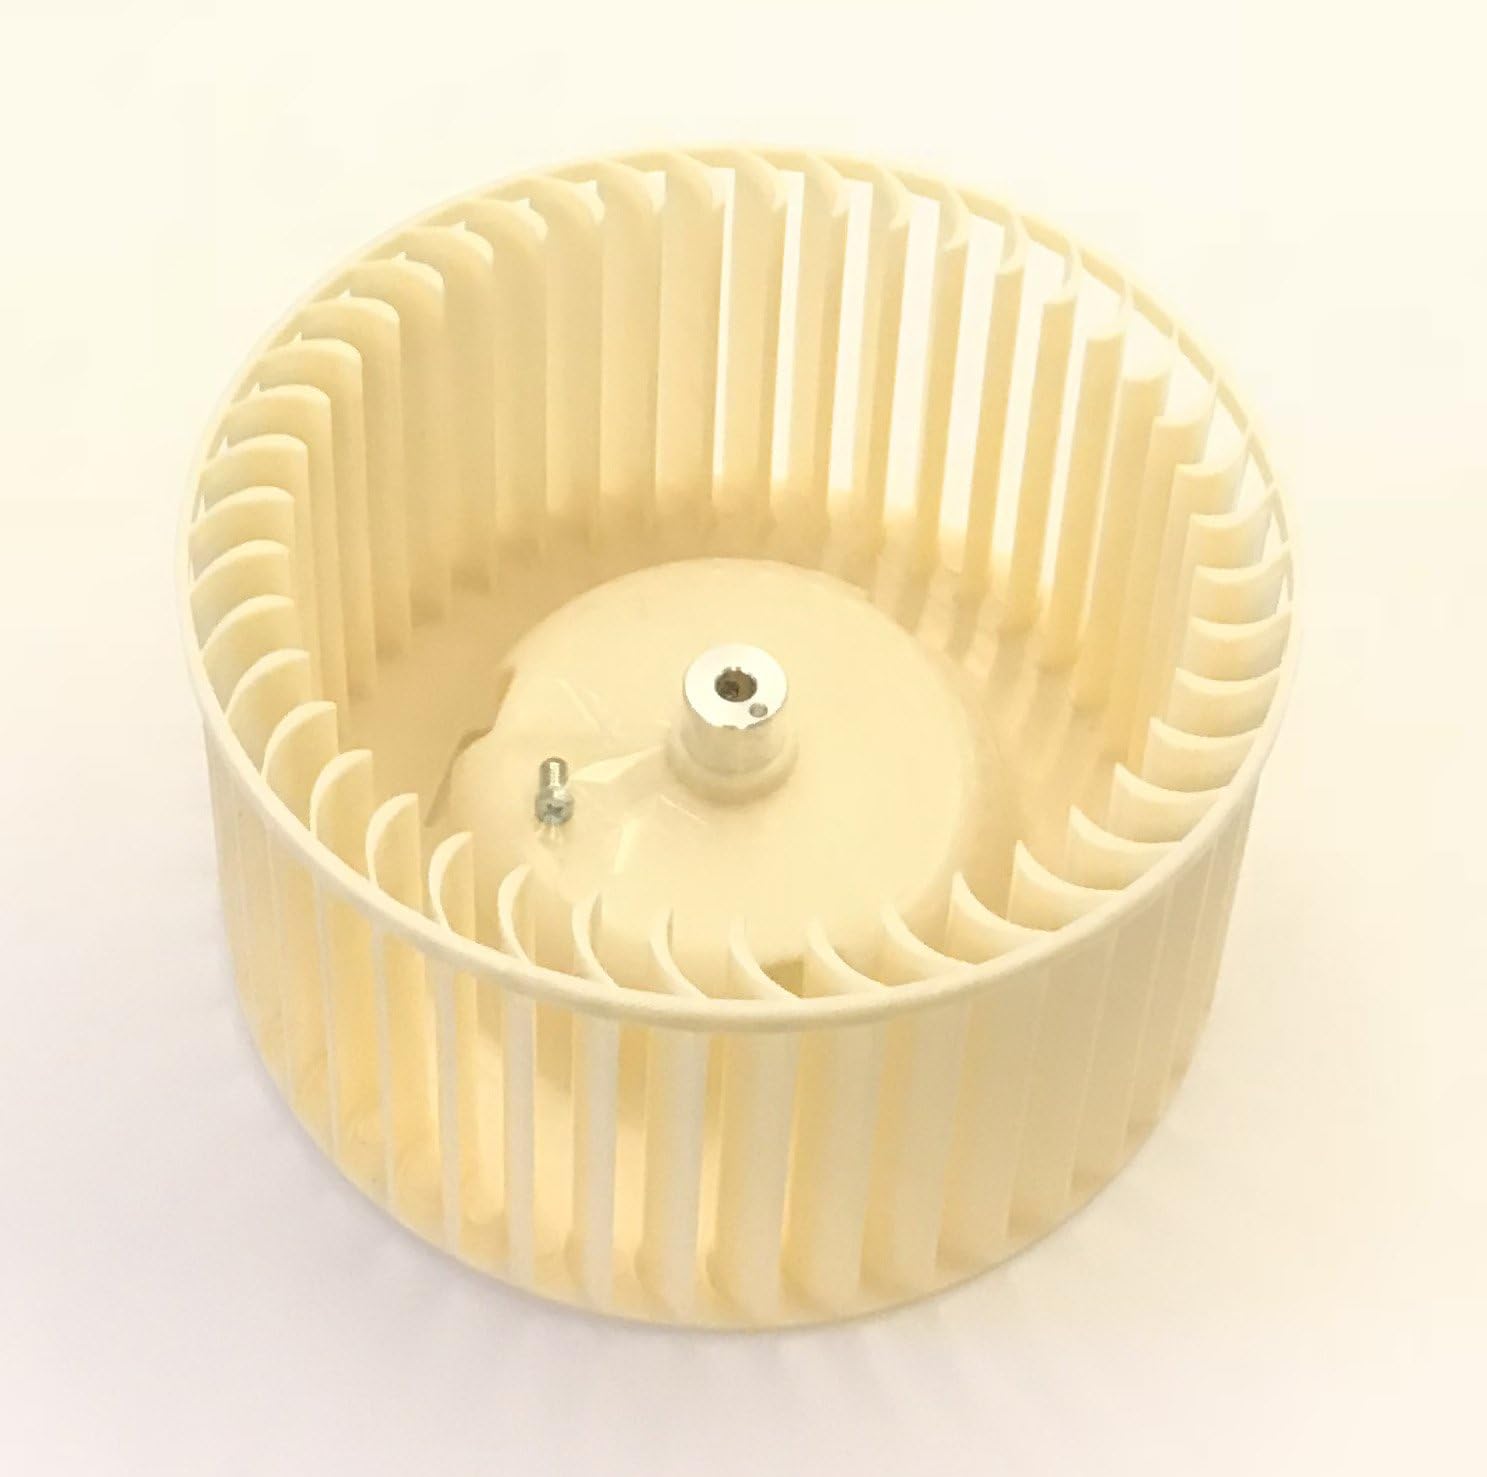 DeLONGHI OEM  Air Conditioner Blower Fan Wheel Specifically For  PACAN120HPE, PACAN130HPEL, PACN120E, PACAN140HPECA